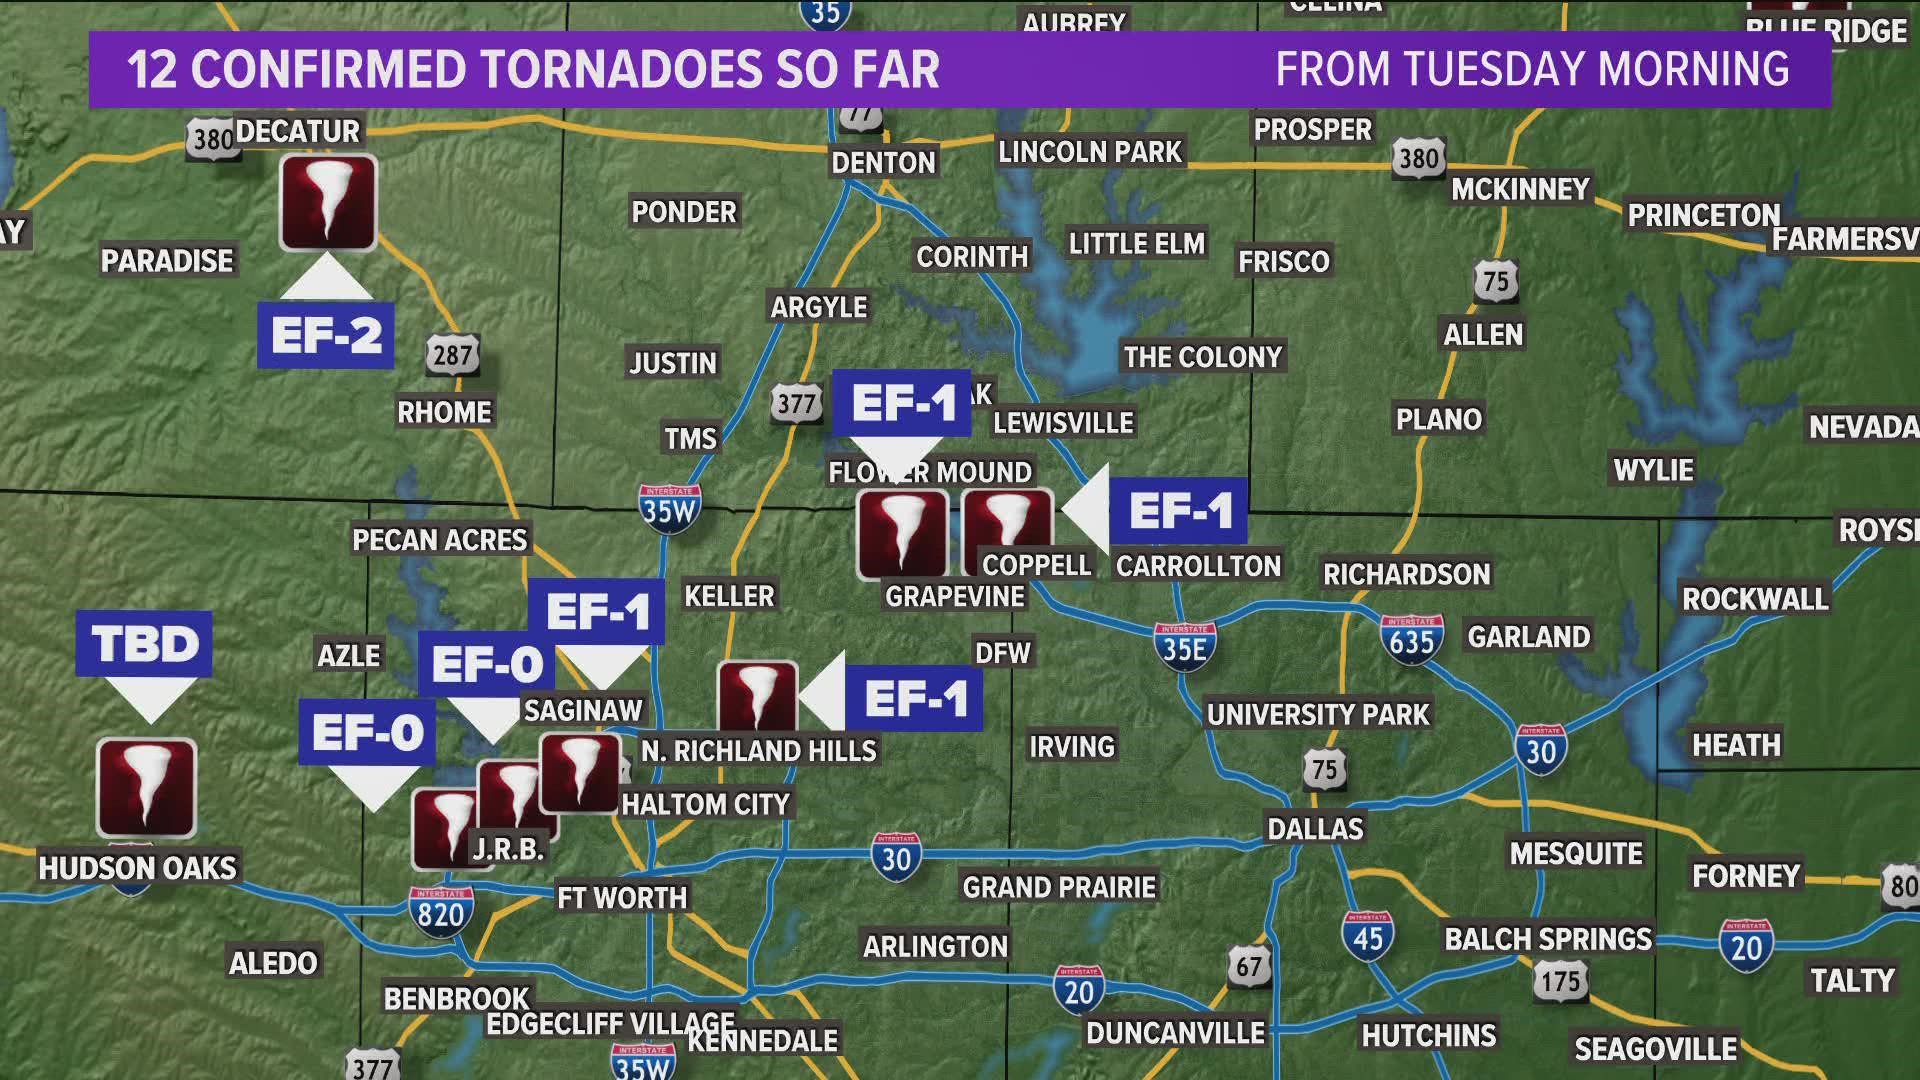 How many tornadoes touched down around North Texas?